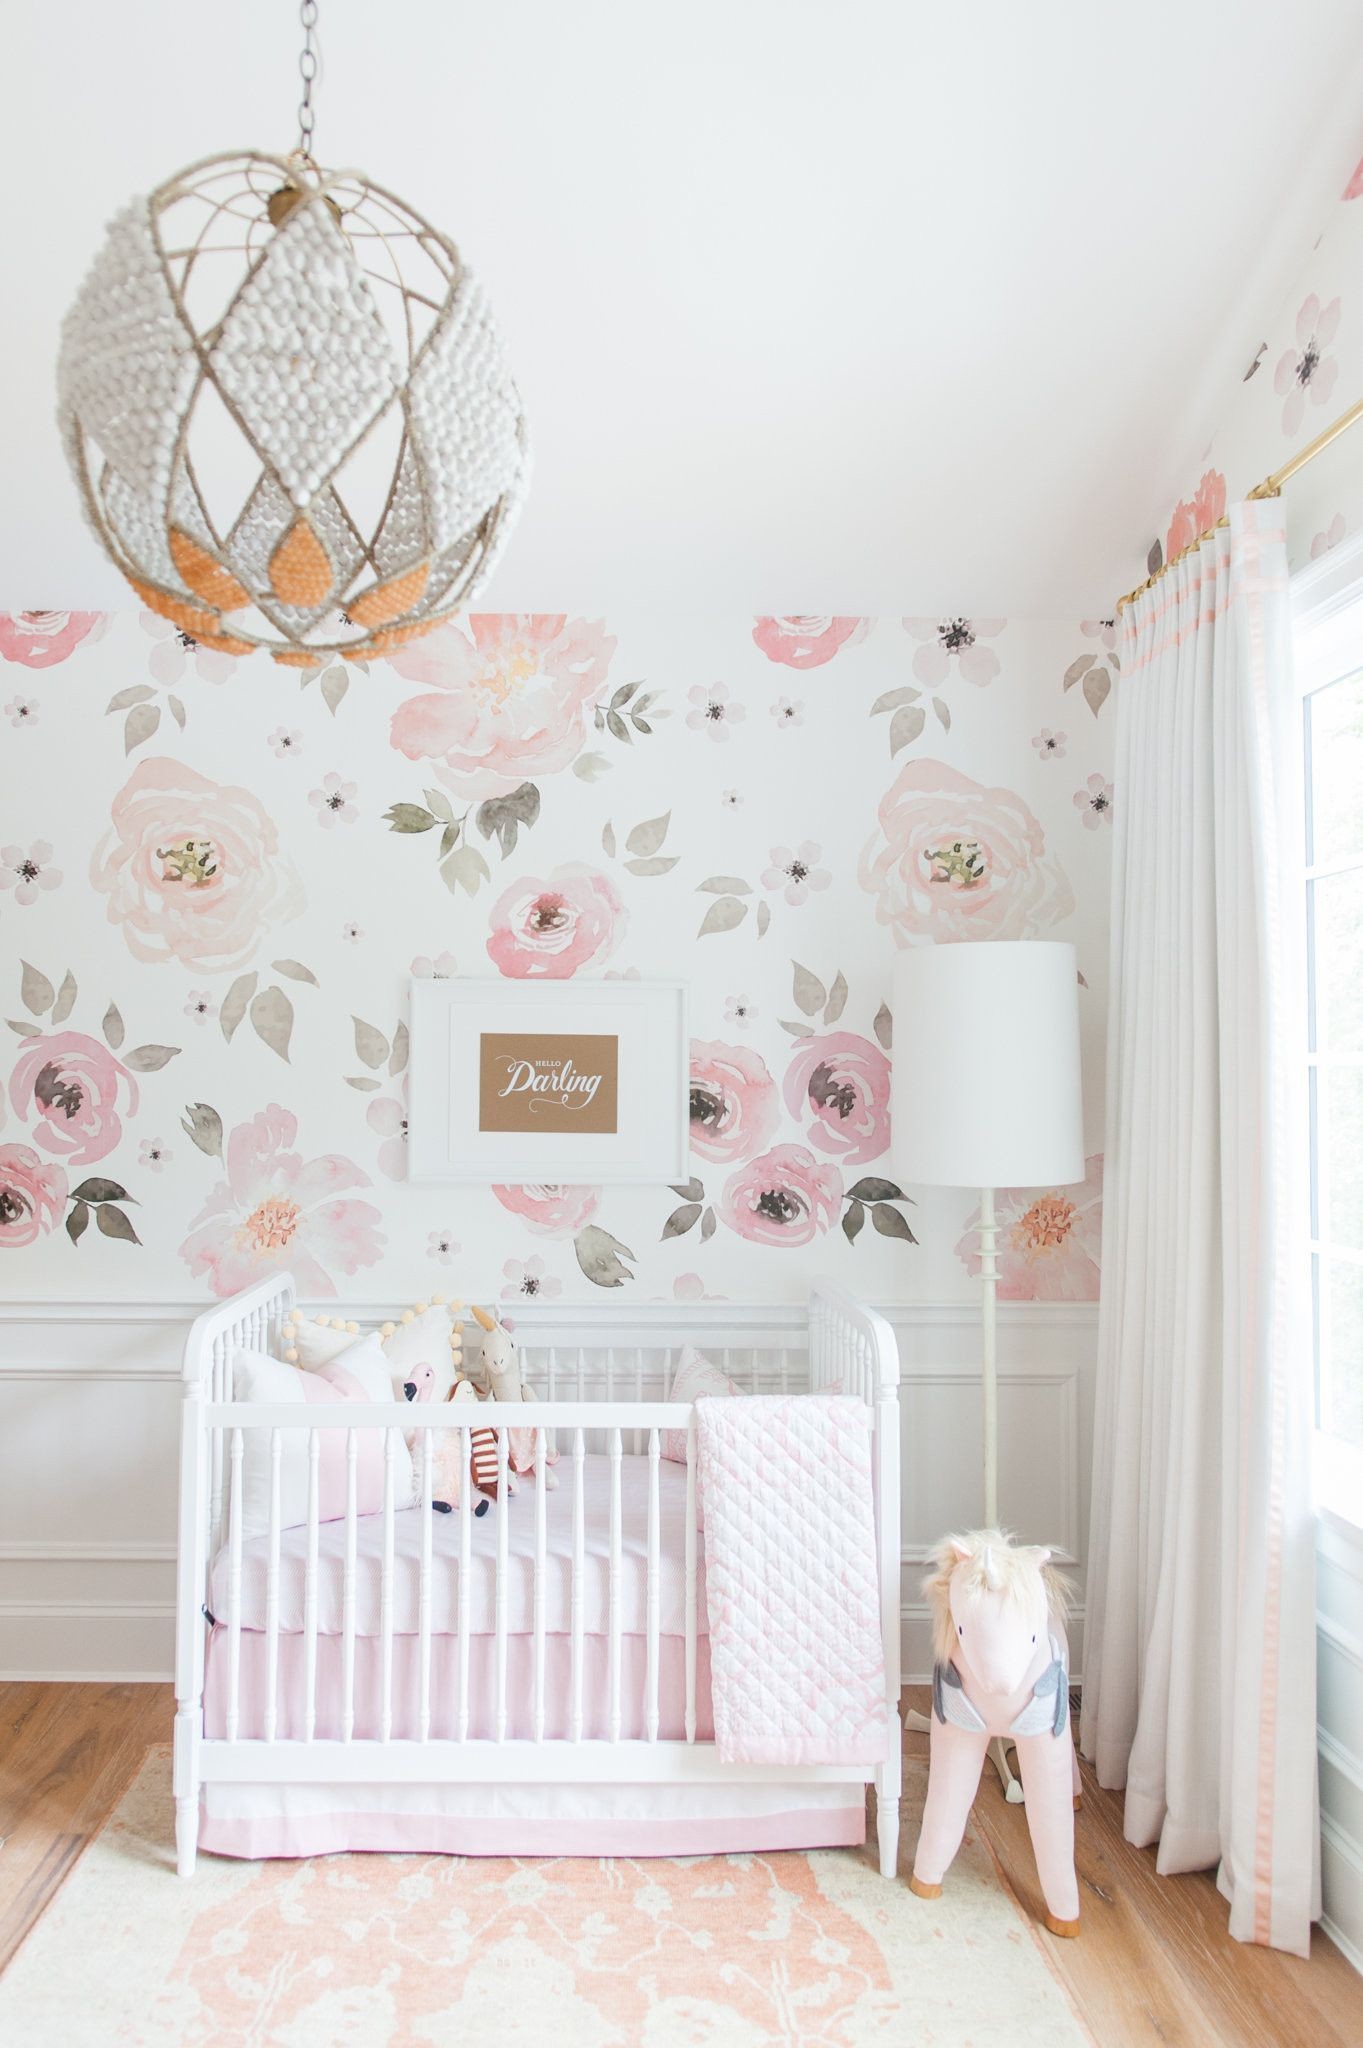 1363x2048 The most luxurious nursery ideas to decor your baby's room. Visit circu.net  and